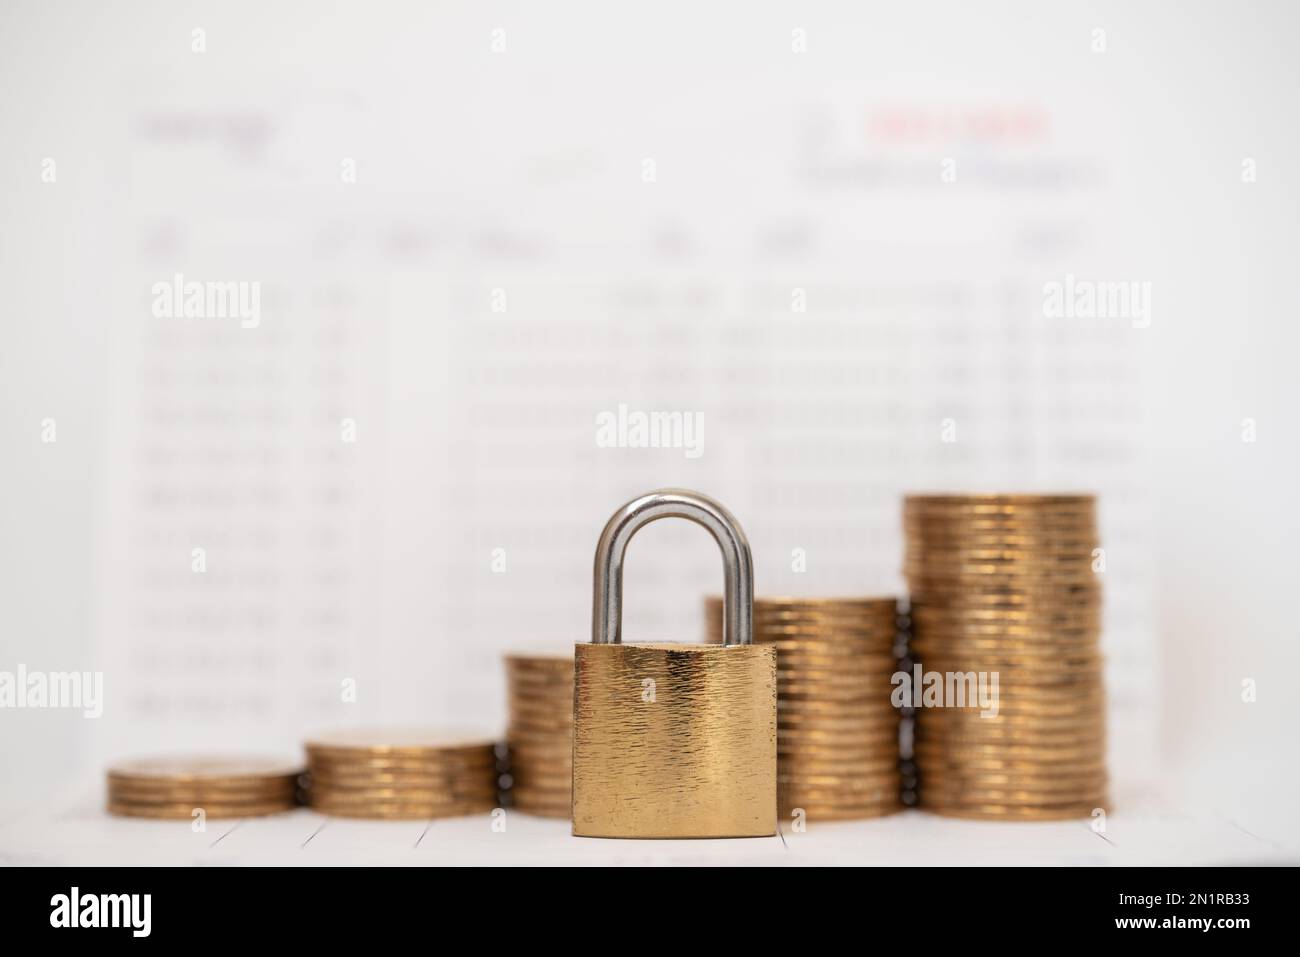 Money and Security Concept. Gold master key lock with stack of coins on bank passbook. Stock Photo